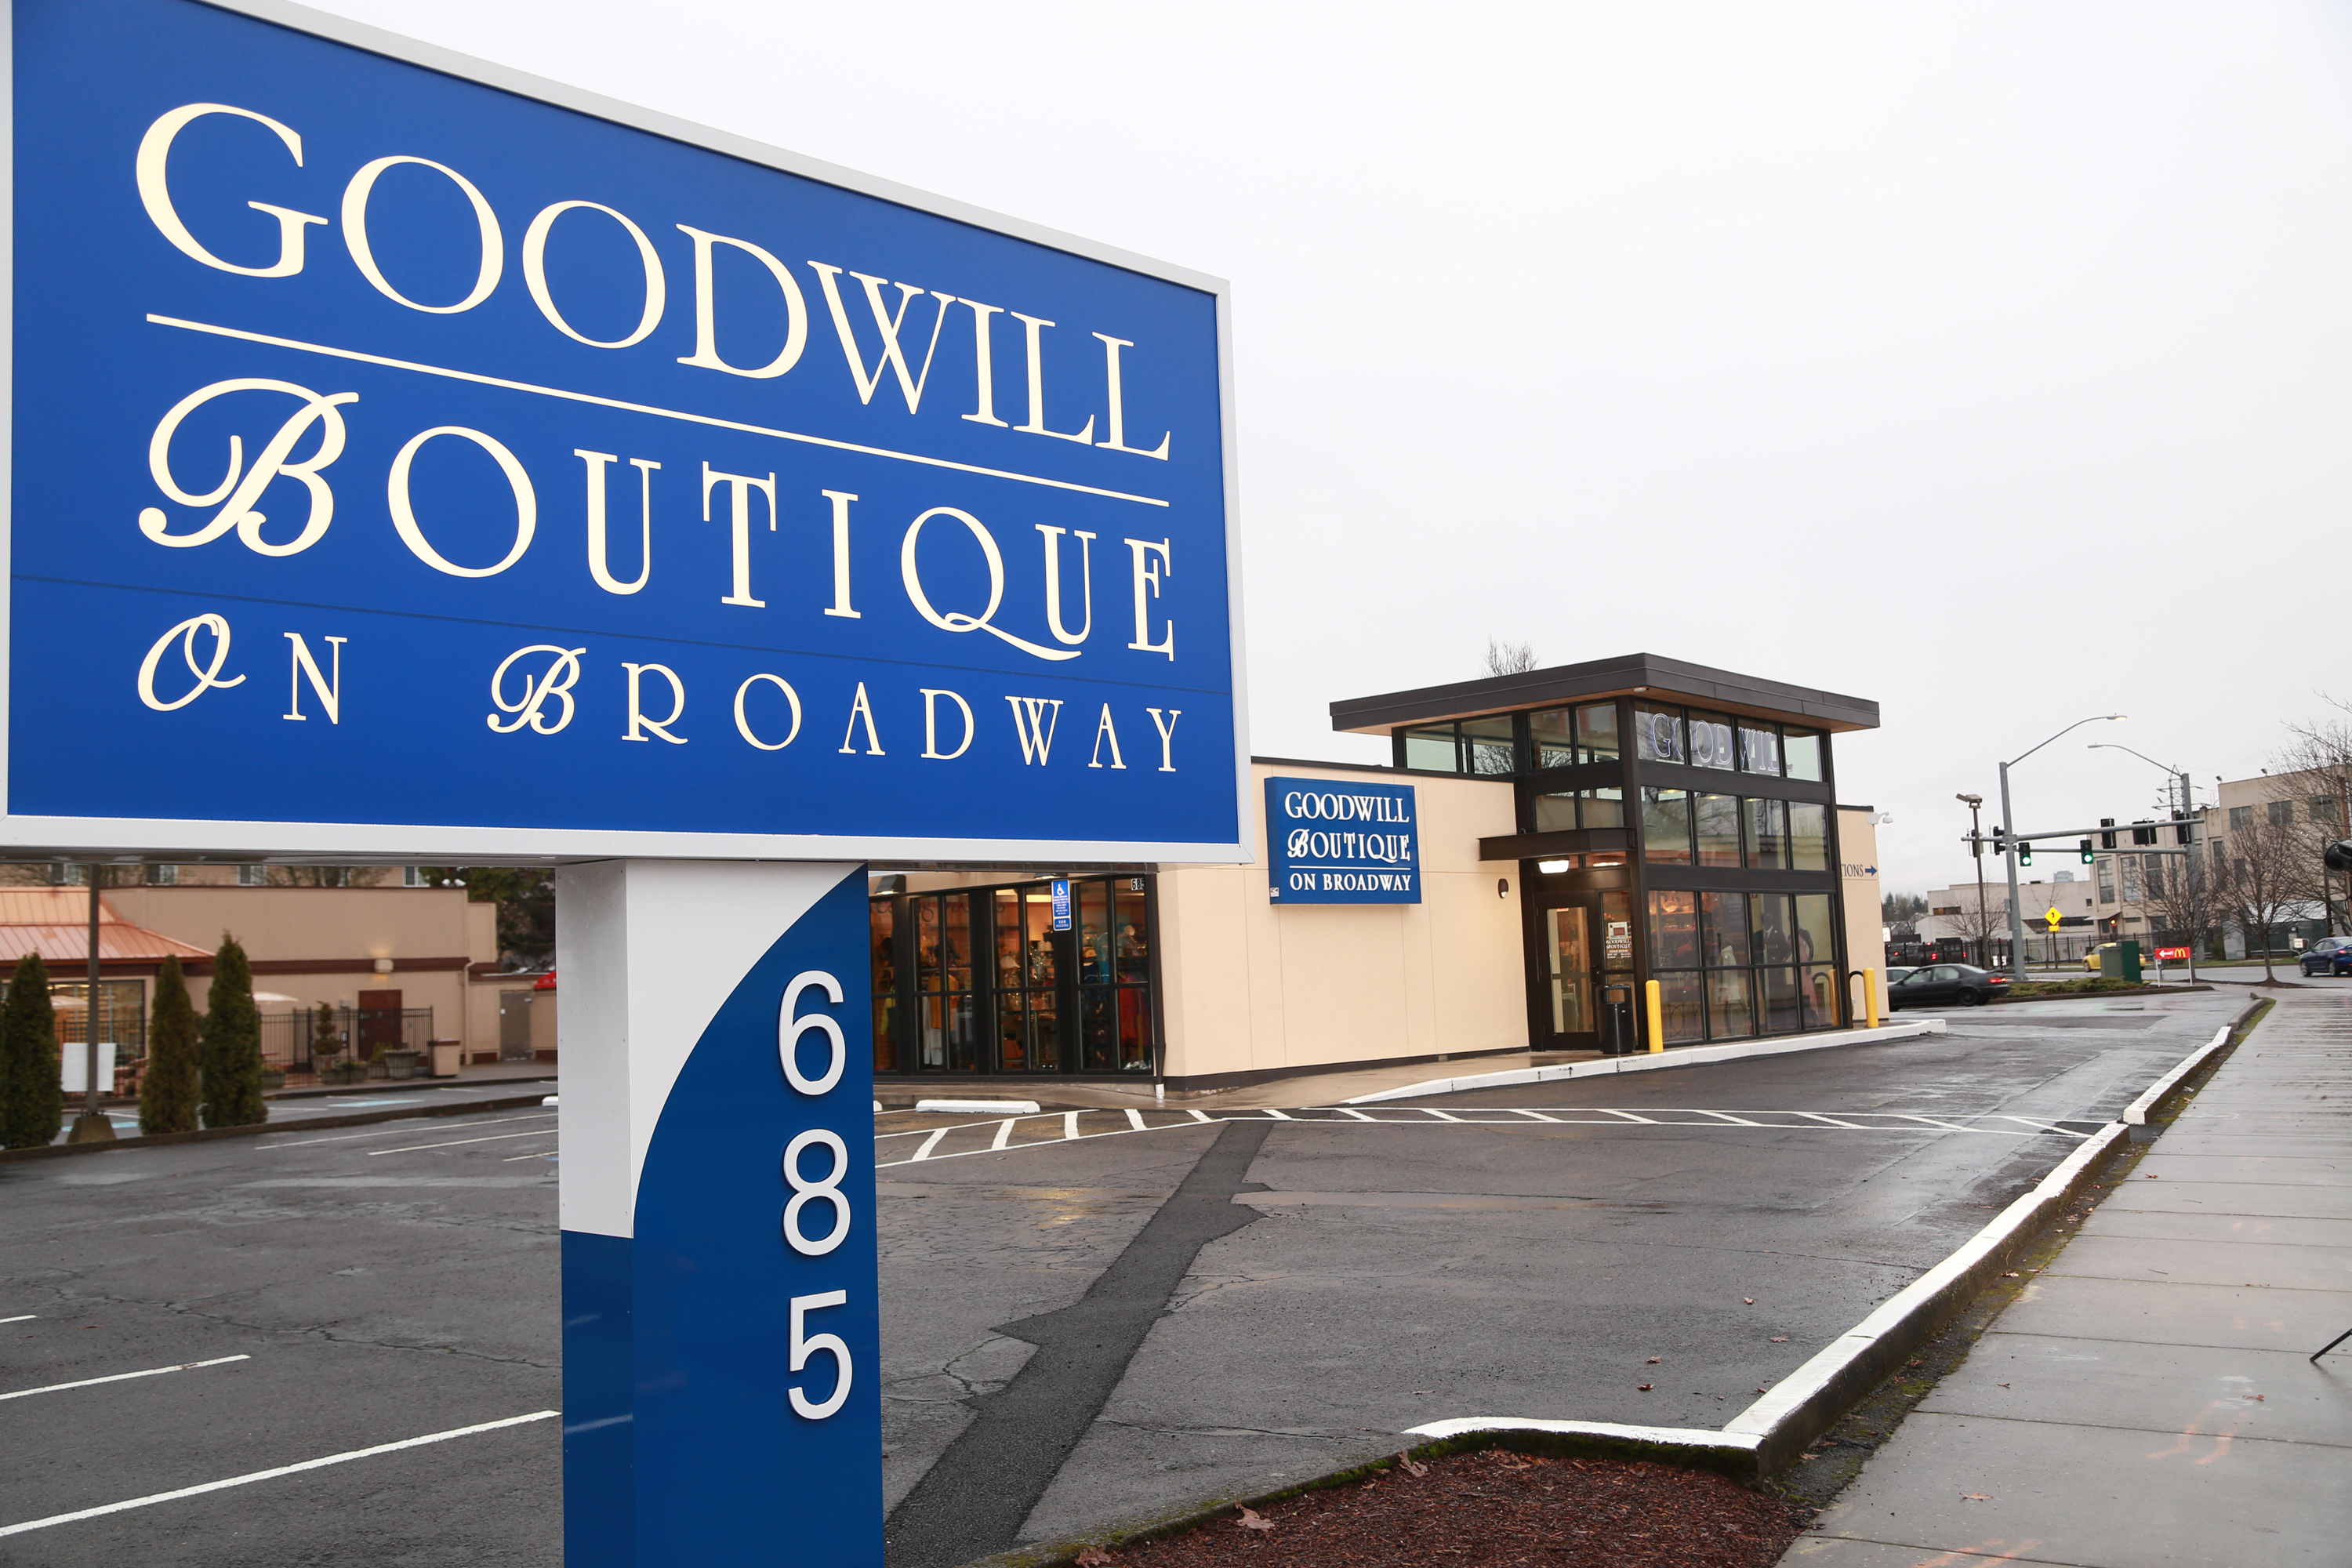 Goodwill Boutique on Broadway Retail Store and Donation Center | 685 E Broadway, Eugene, OR, 97401 | +1 (541) 344-1029